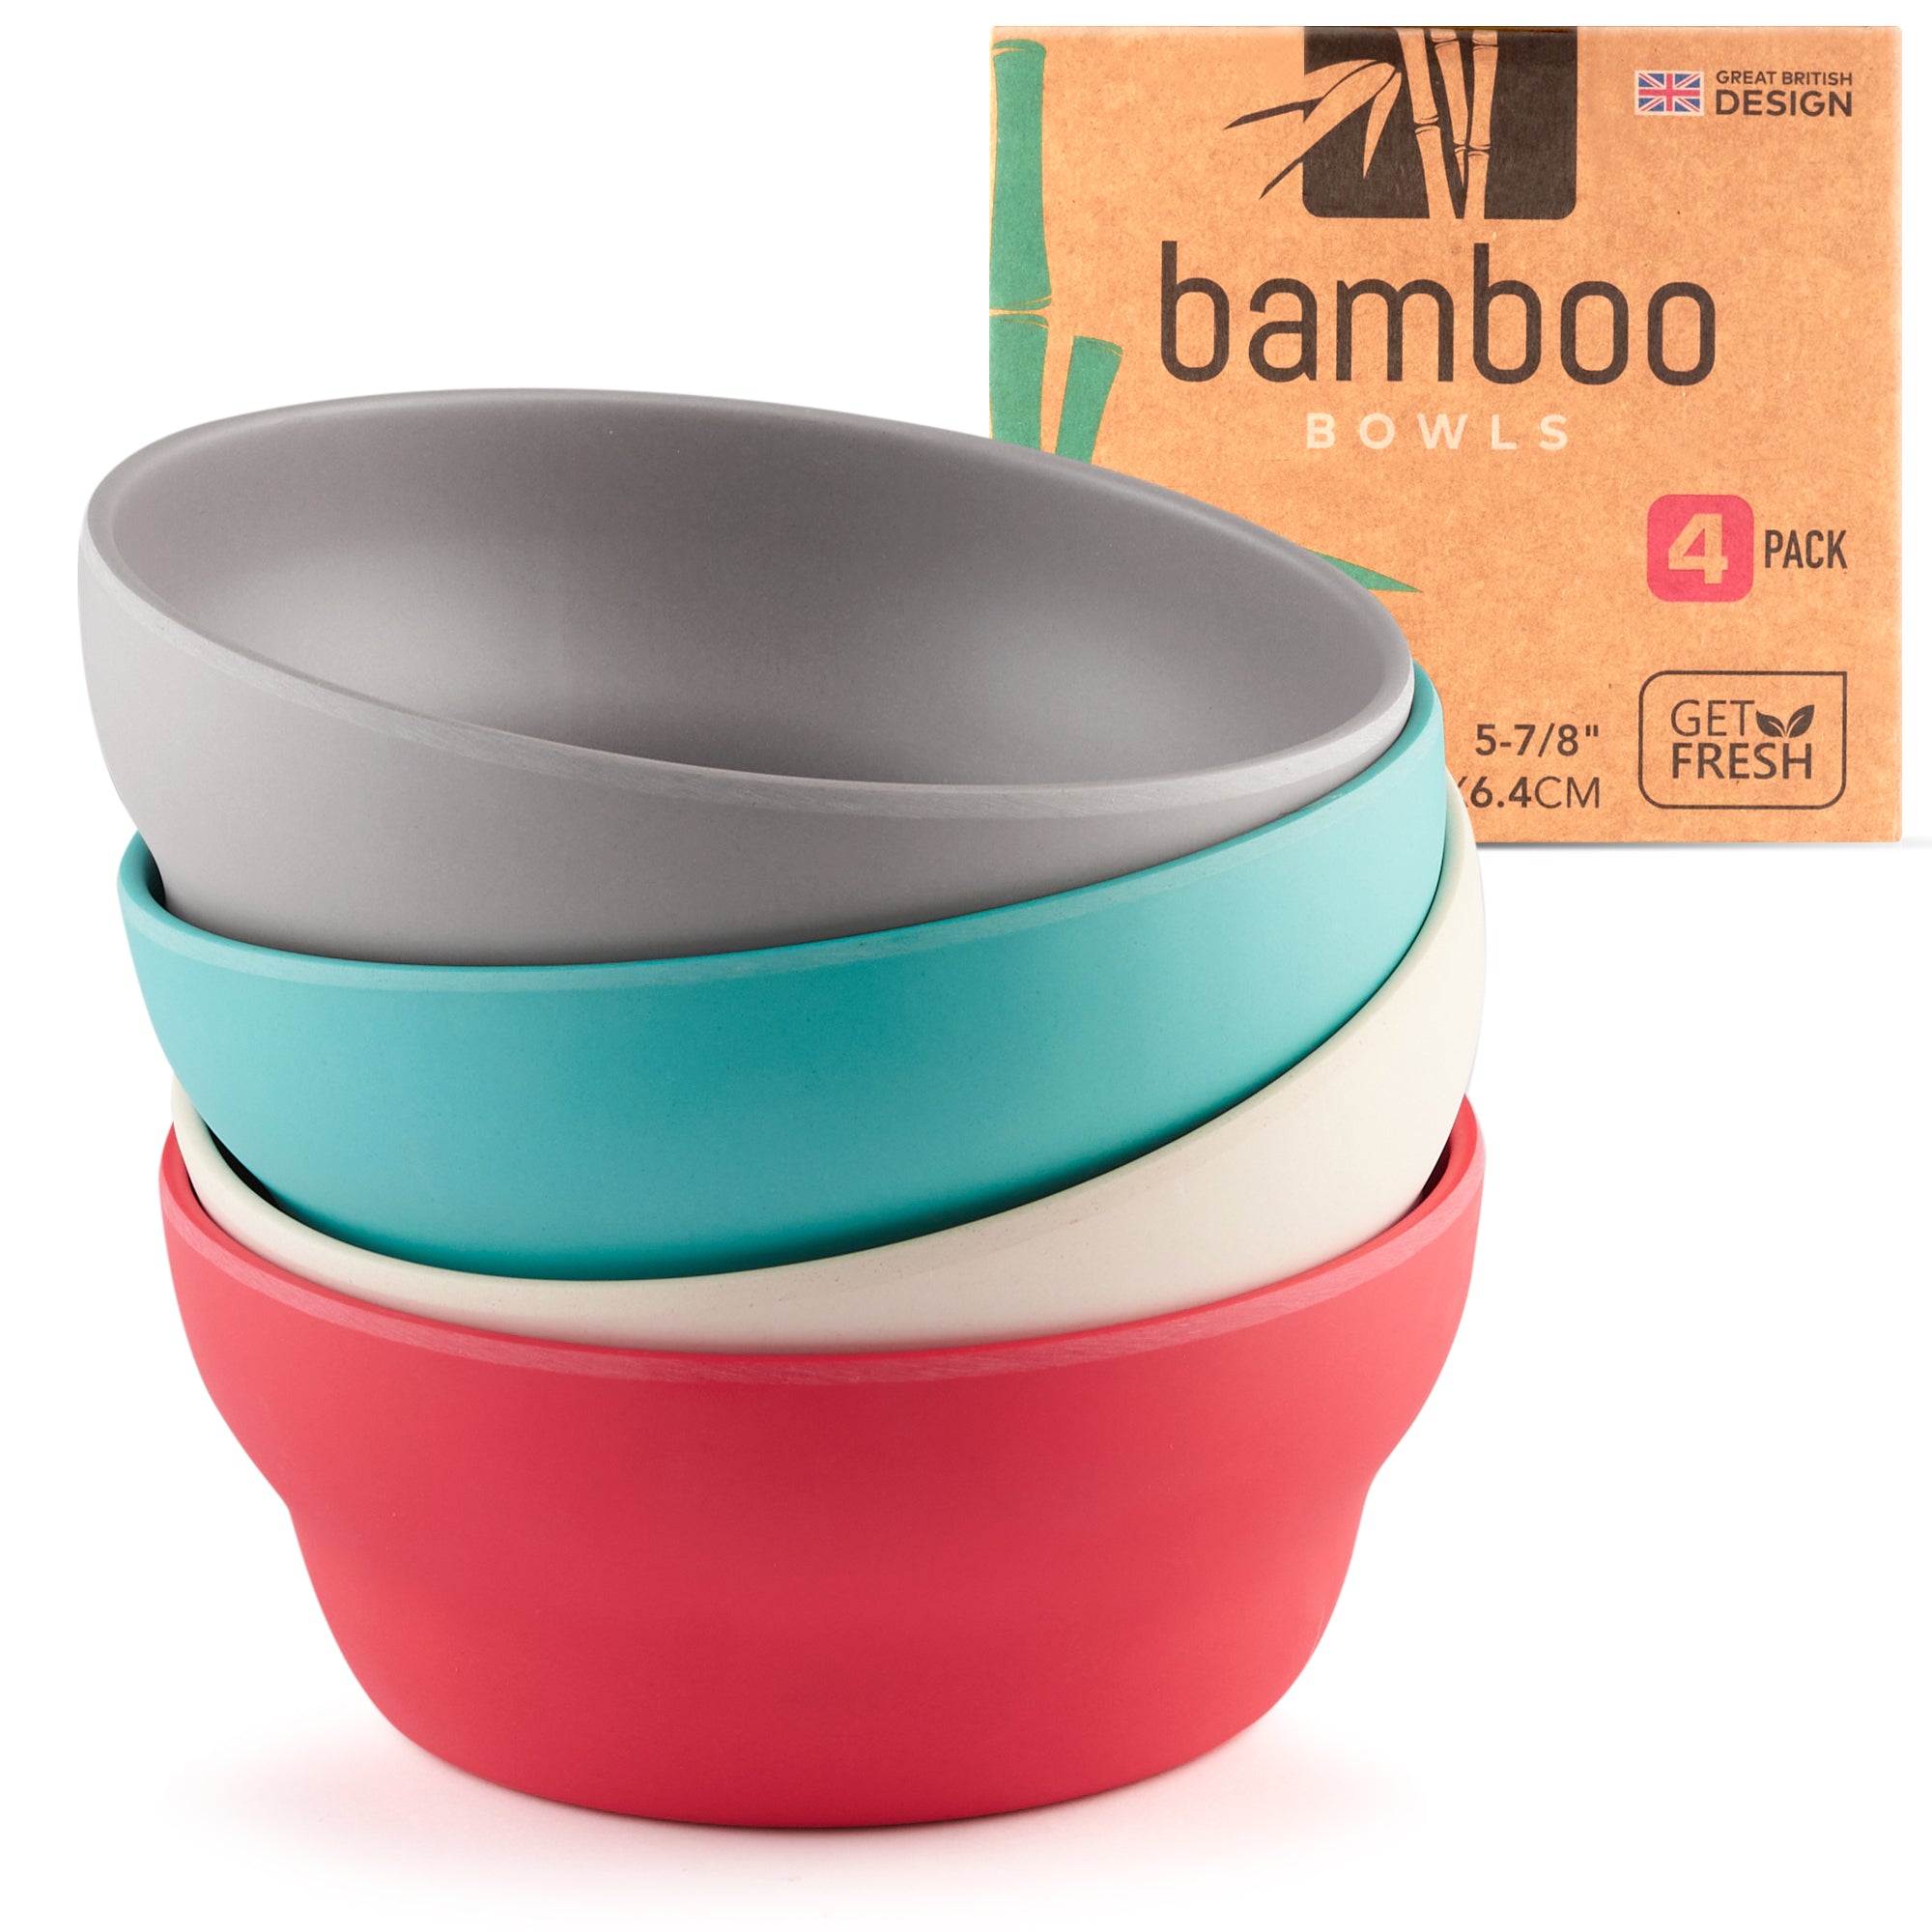 Adult-sized bamboo bowls